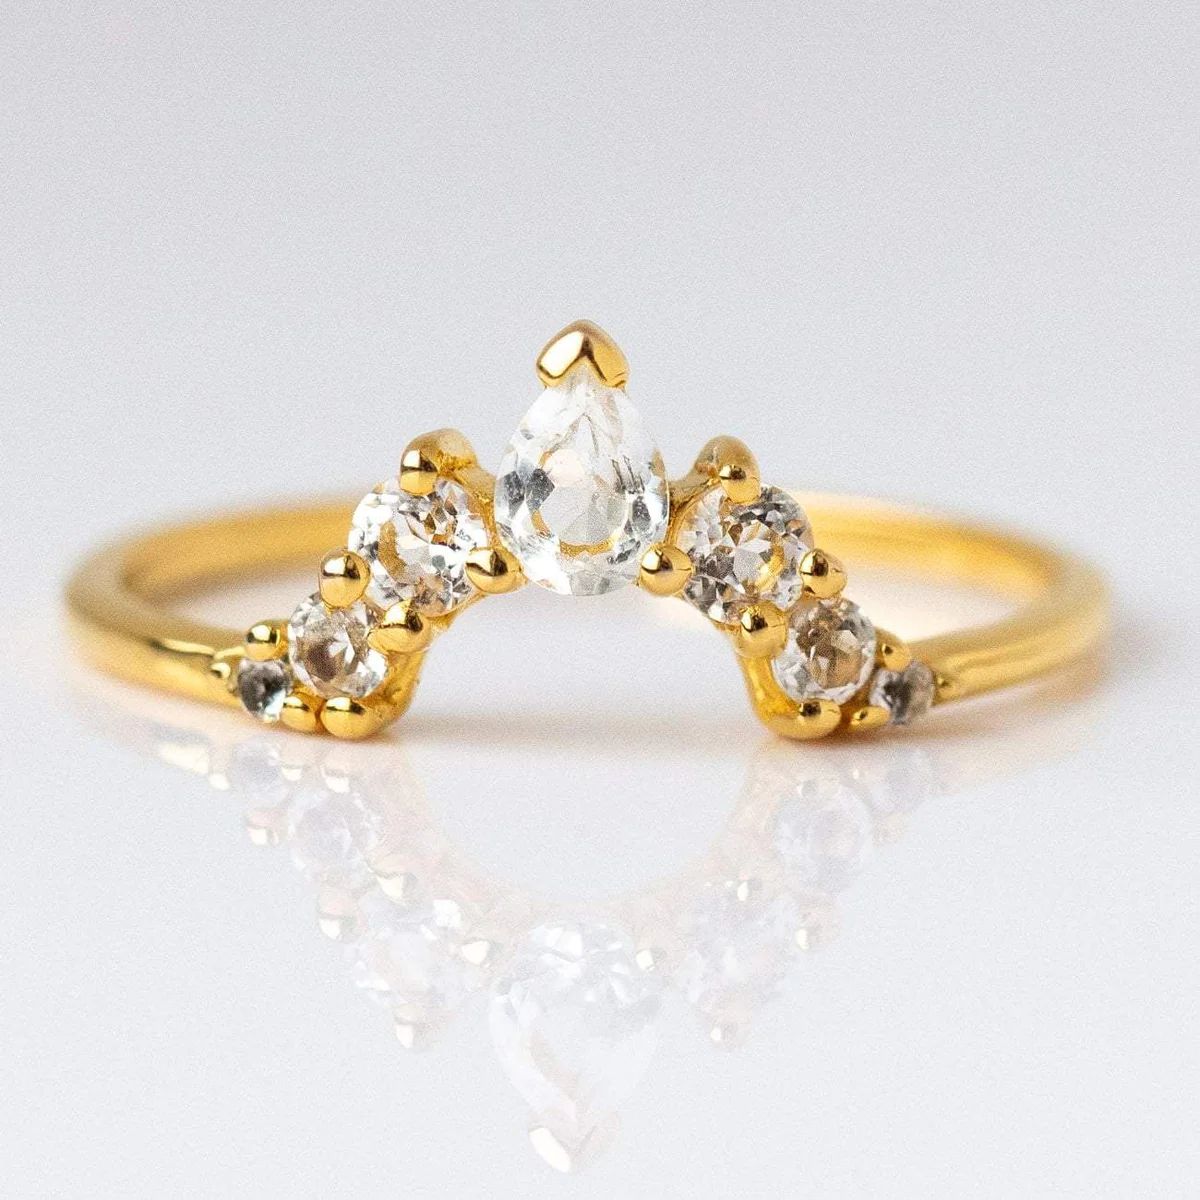 White Topaz Angels Arc Ring | Local Eclectic